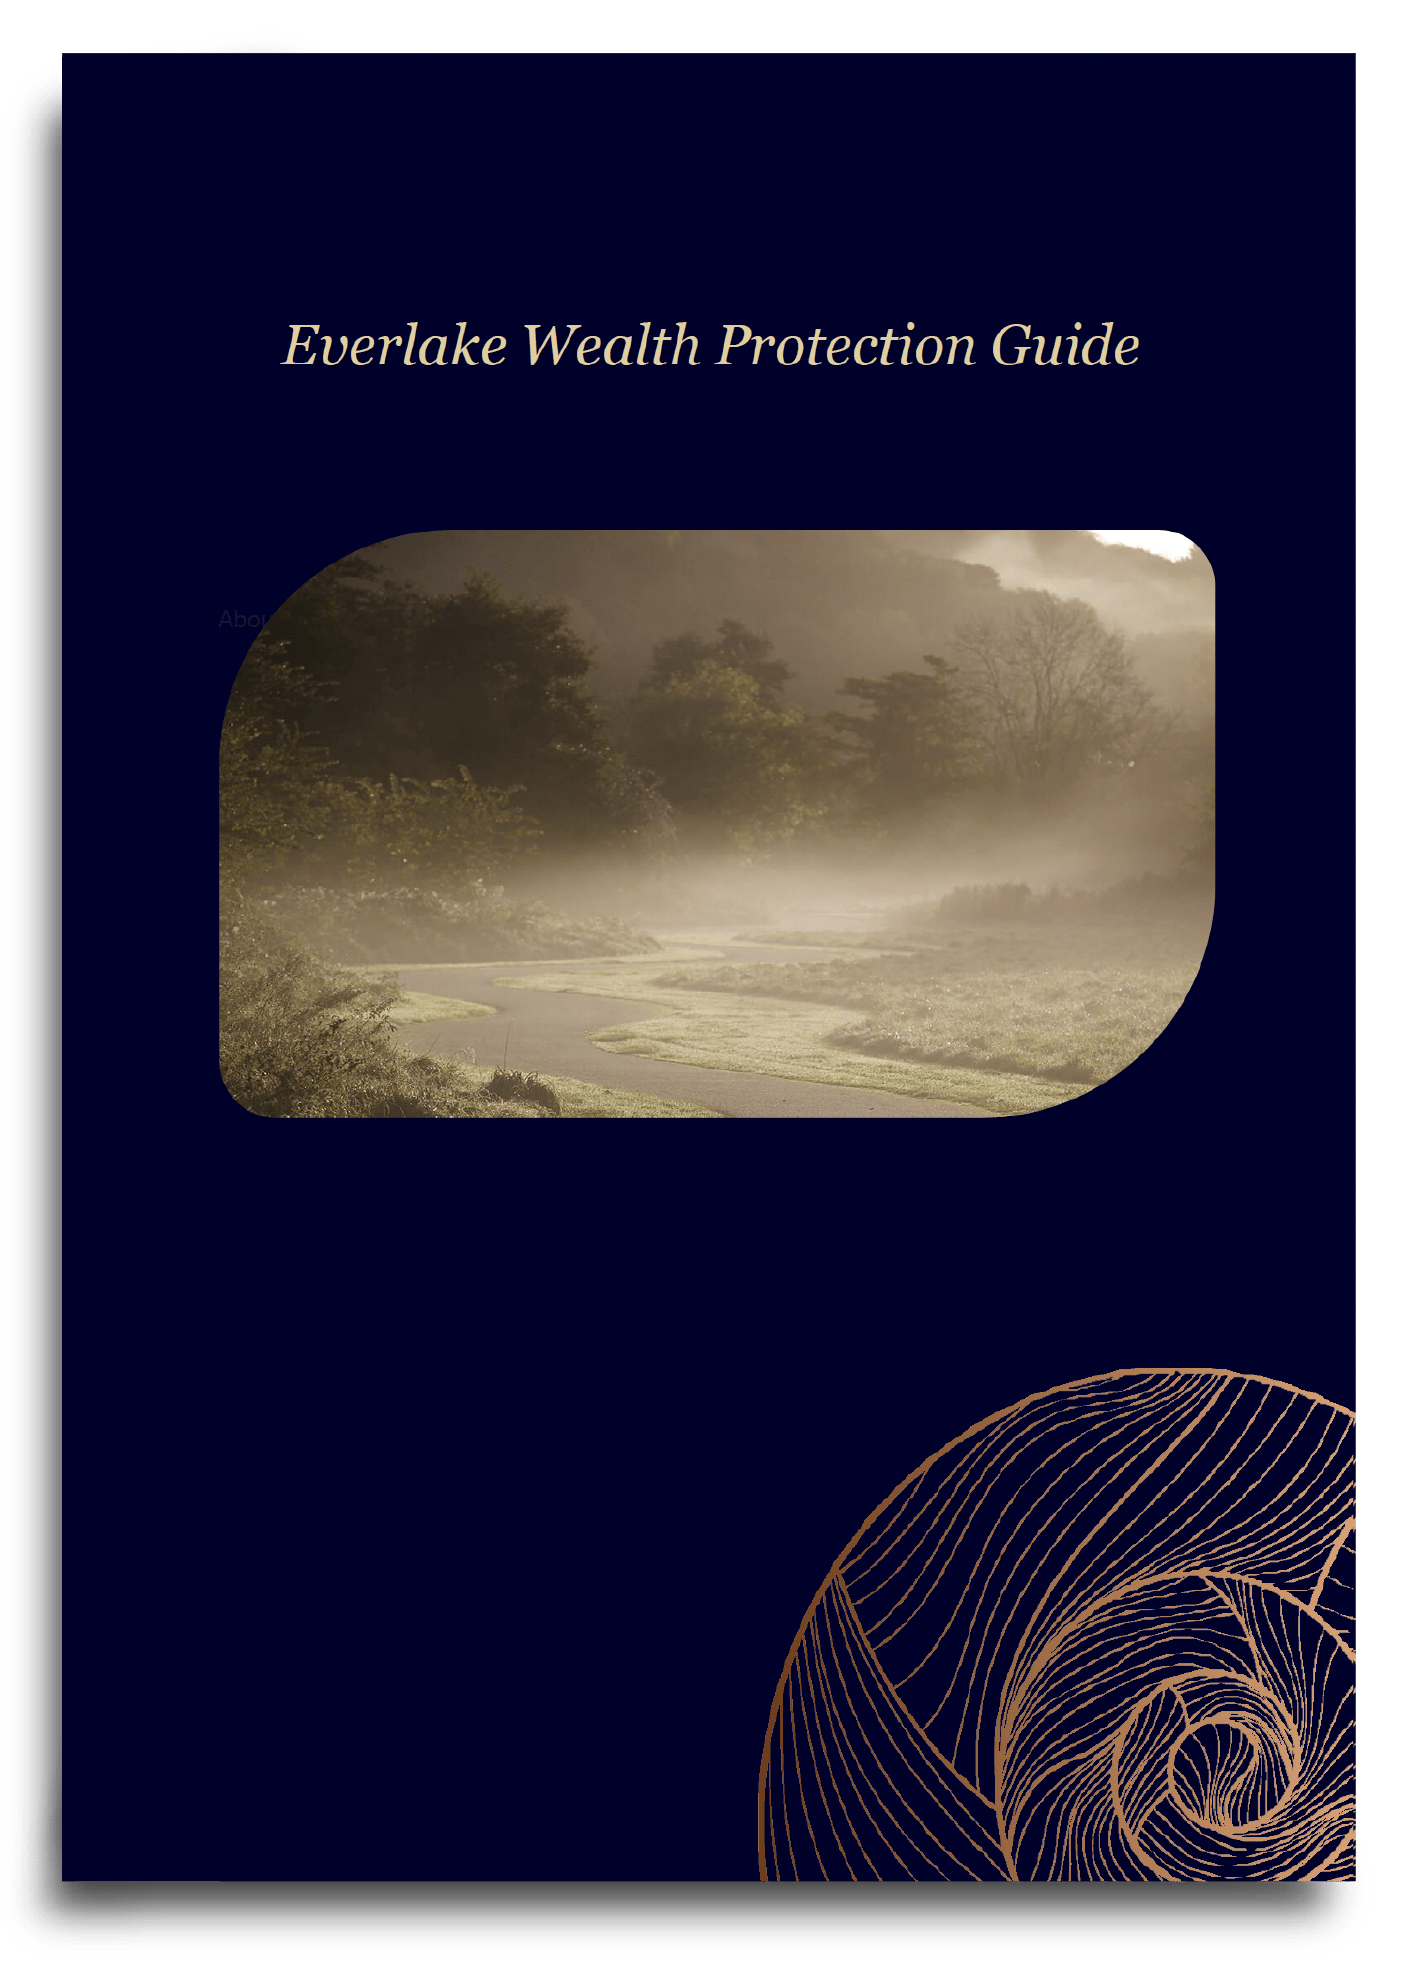 Guide Cover: Everlake Wealth Protection Guide